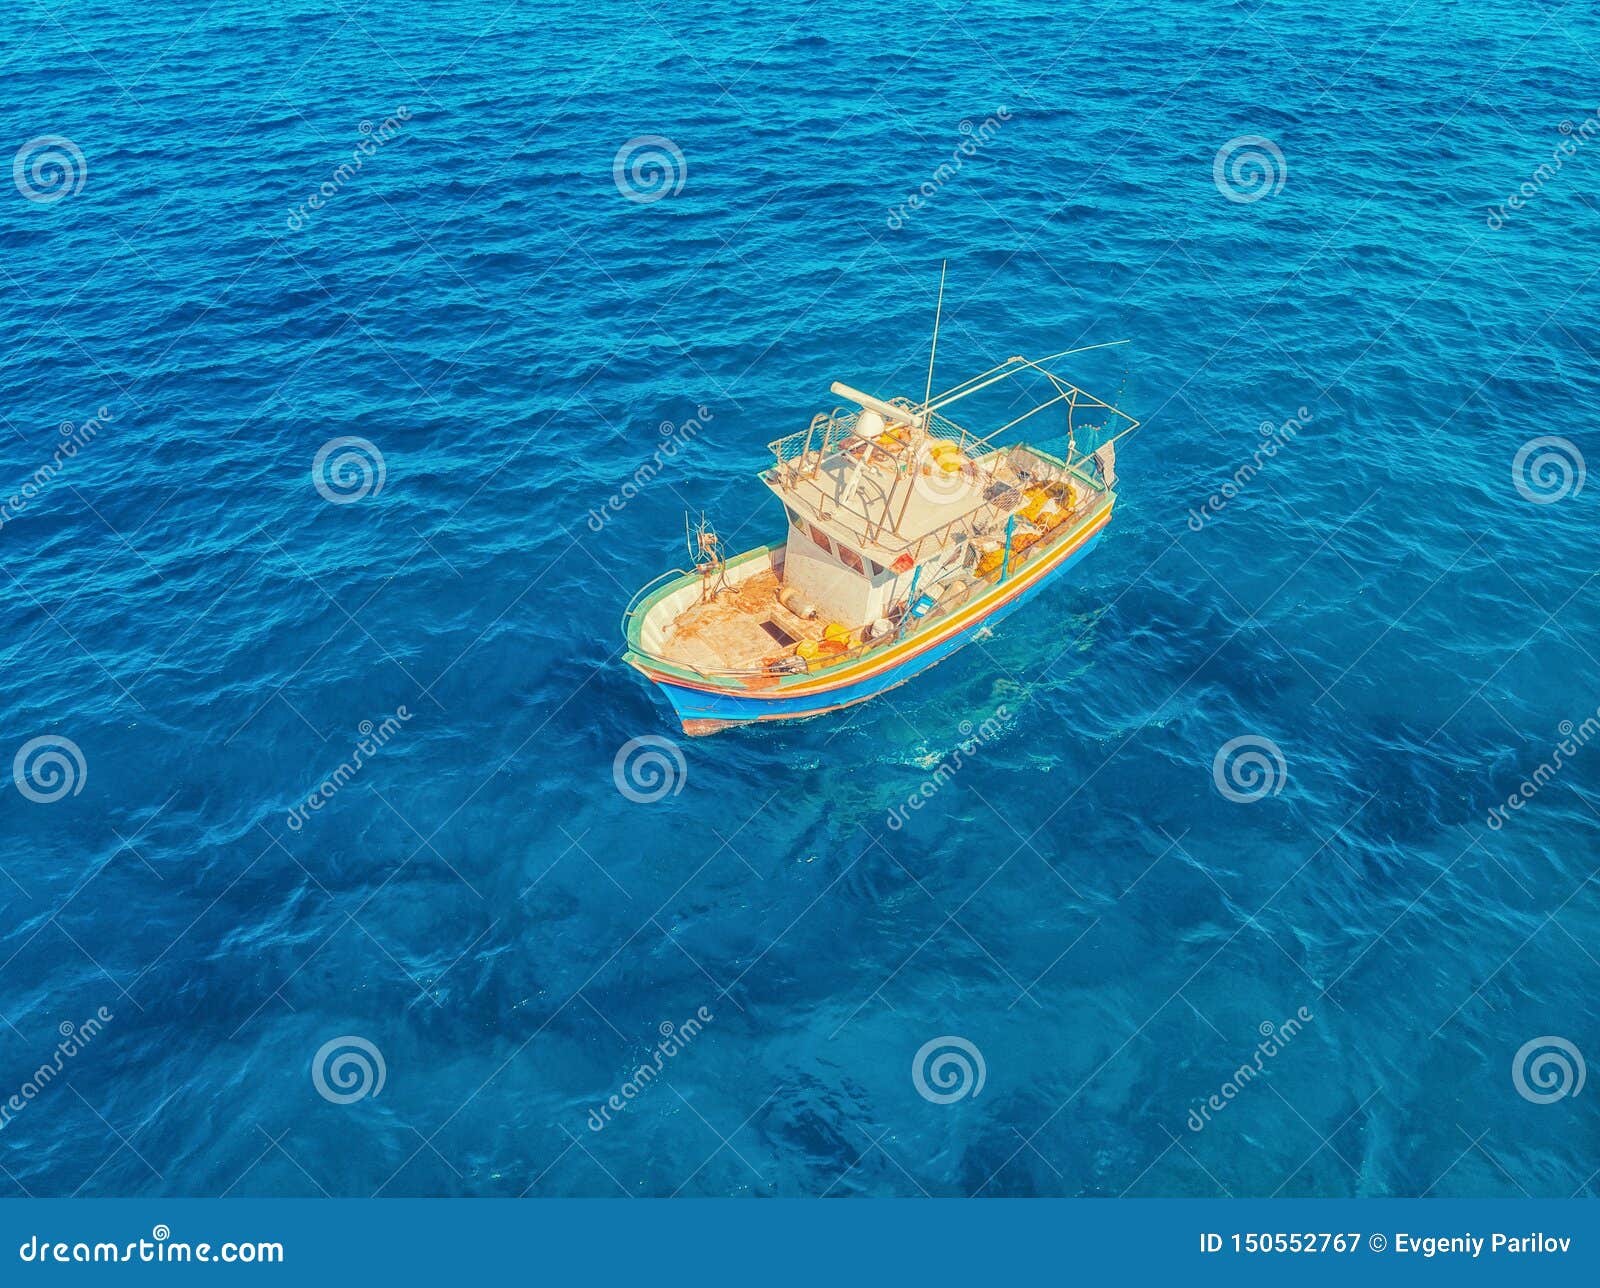 Fishing Boat in Blue Sea Water, Fishermen Set Nets for Fish. Aerial Top View  Stock Image - Image of corals, light: 150552767